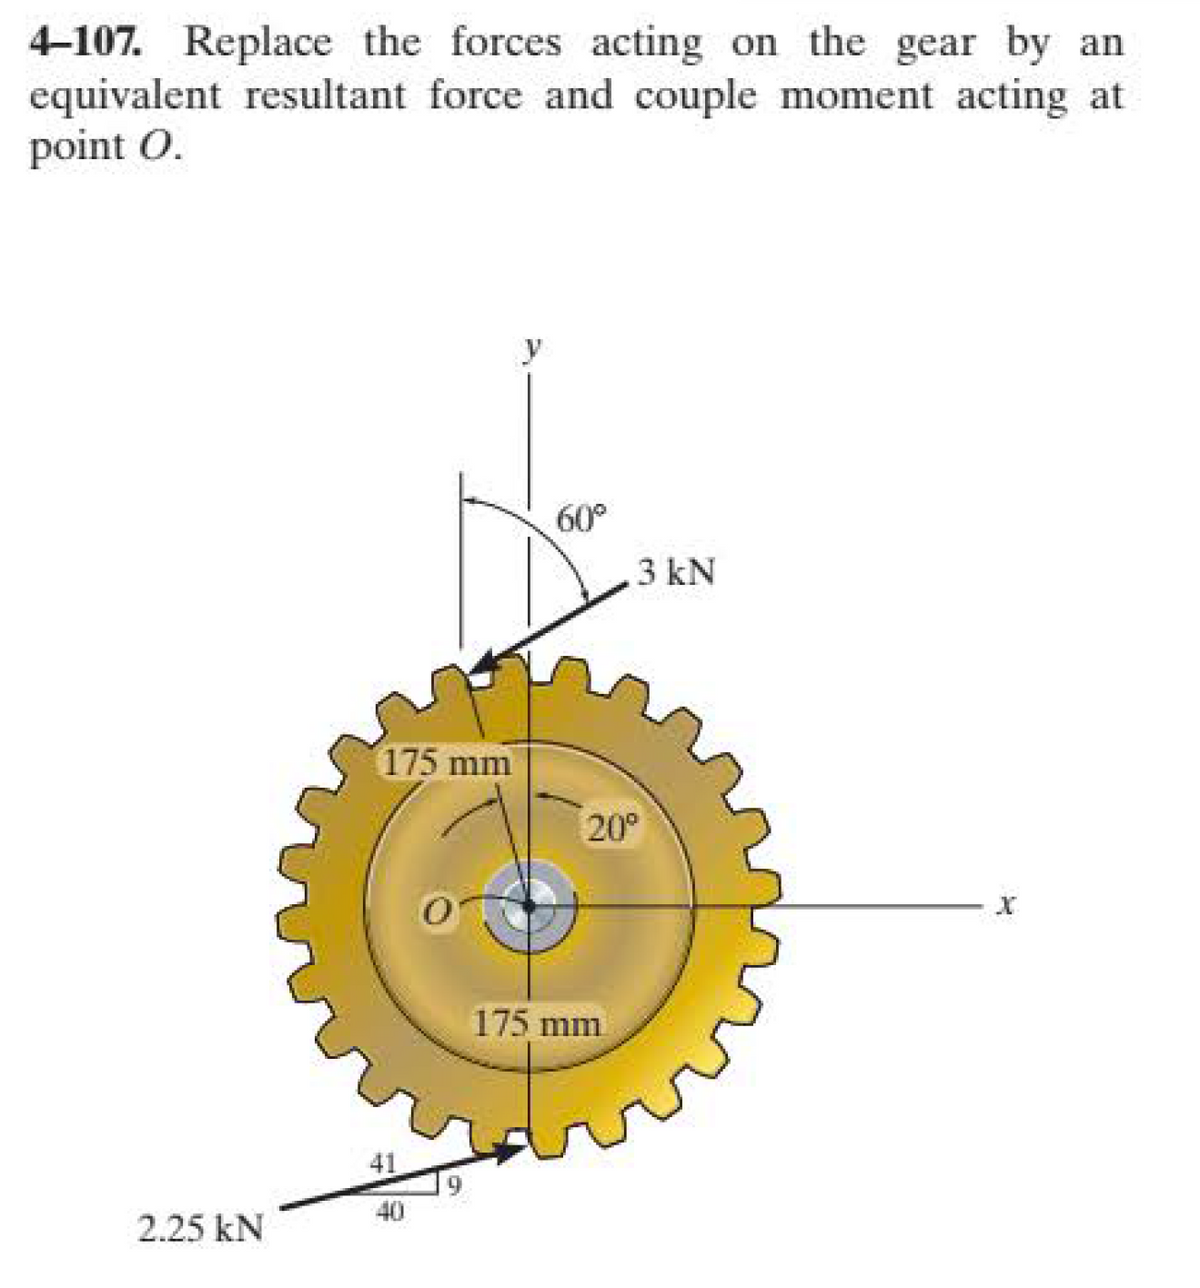 4-107. Replace the forces acting on the gear by an
equivalent resultant force and couple moment acting at
point O.
y
60°
3 kN
175 mm
20°
41
40
2.25 kN
175 mm